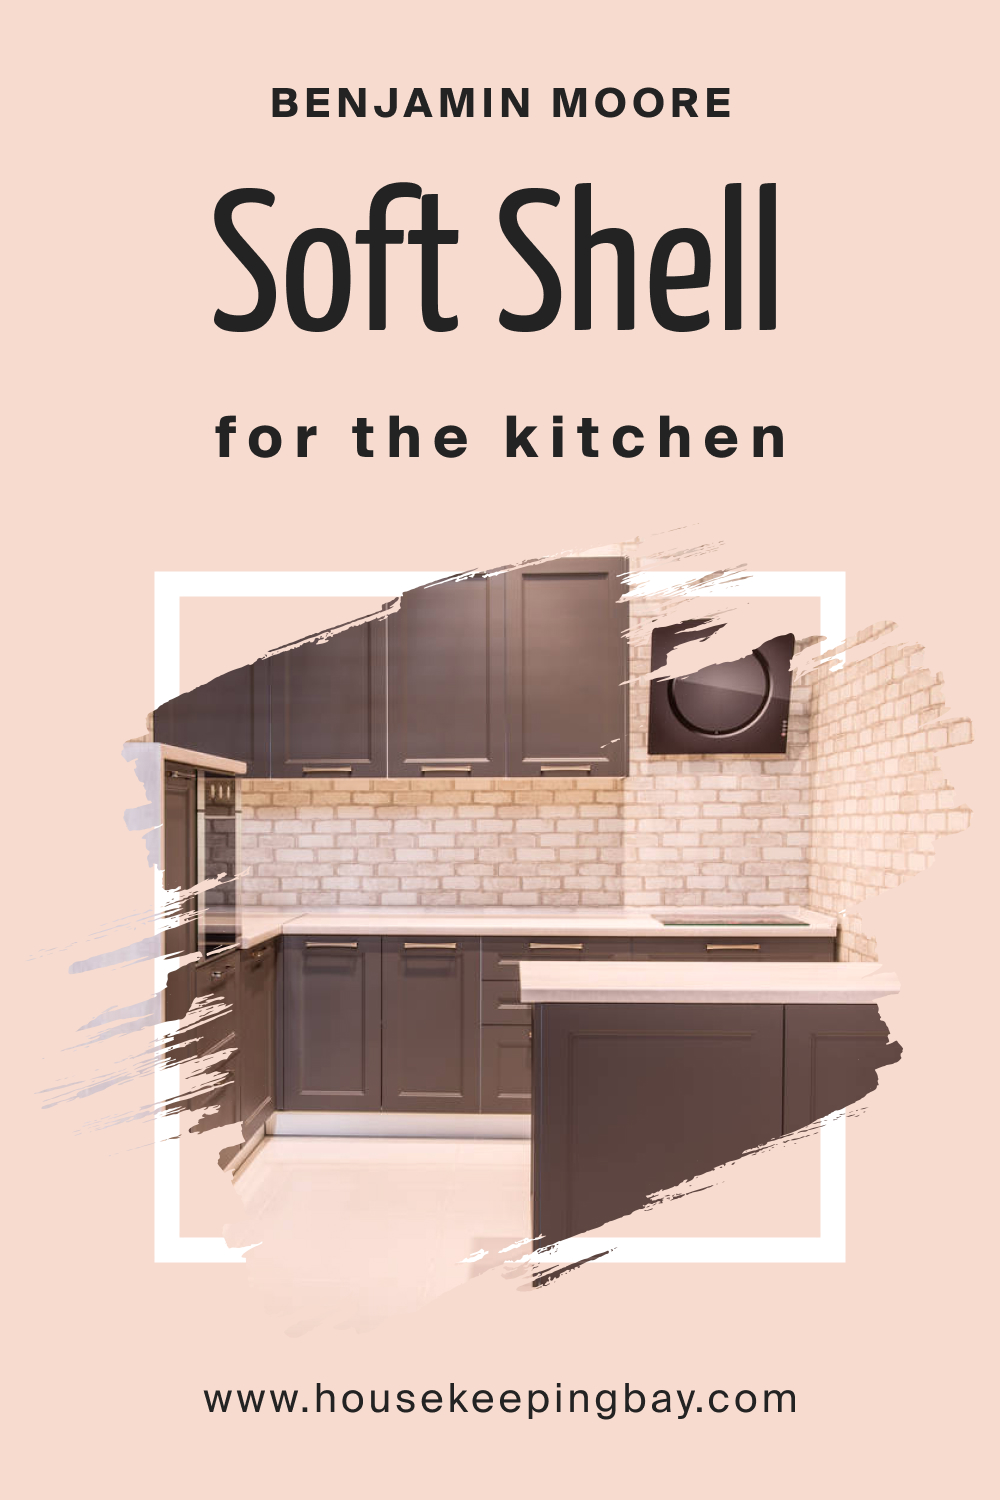 Benjamin Moore. Soft Shell 015 for the Kitchen